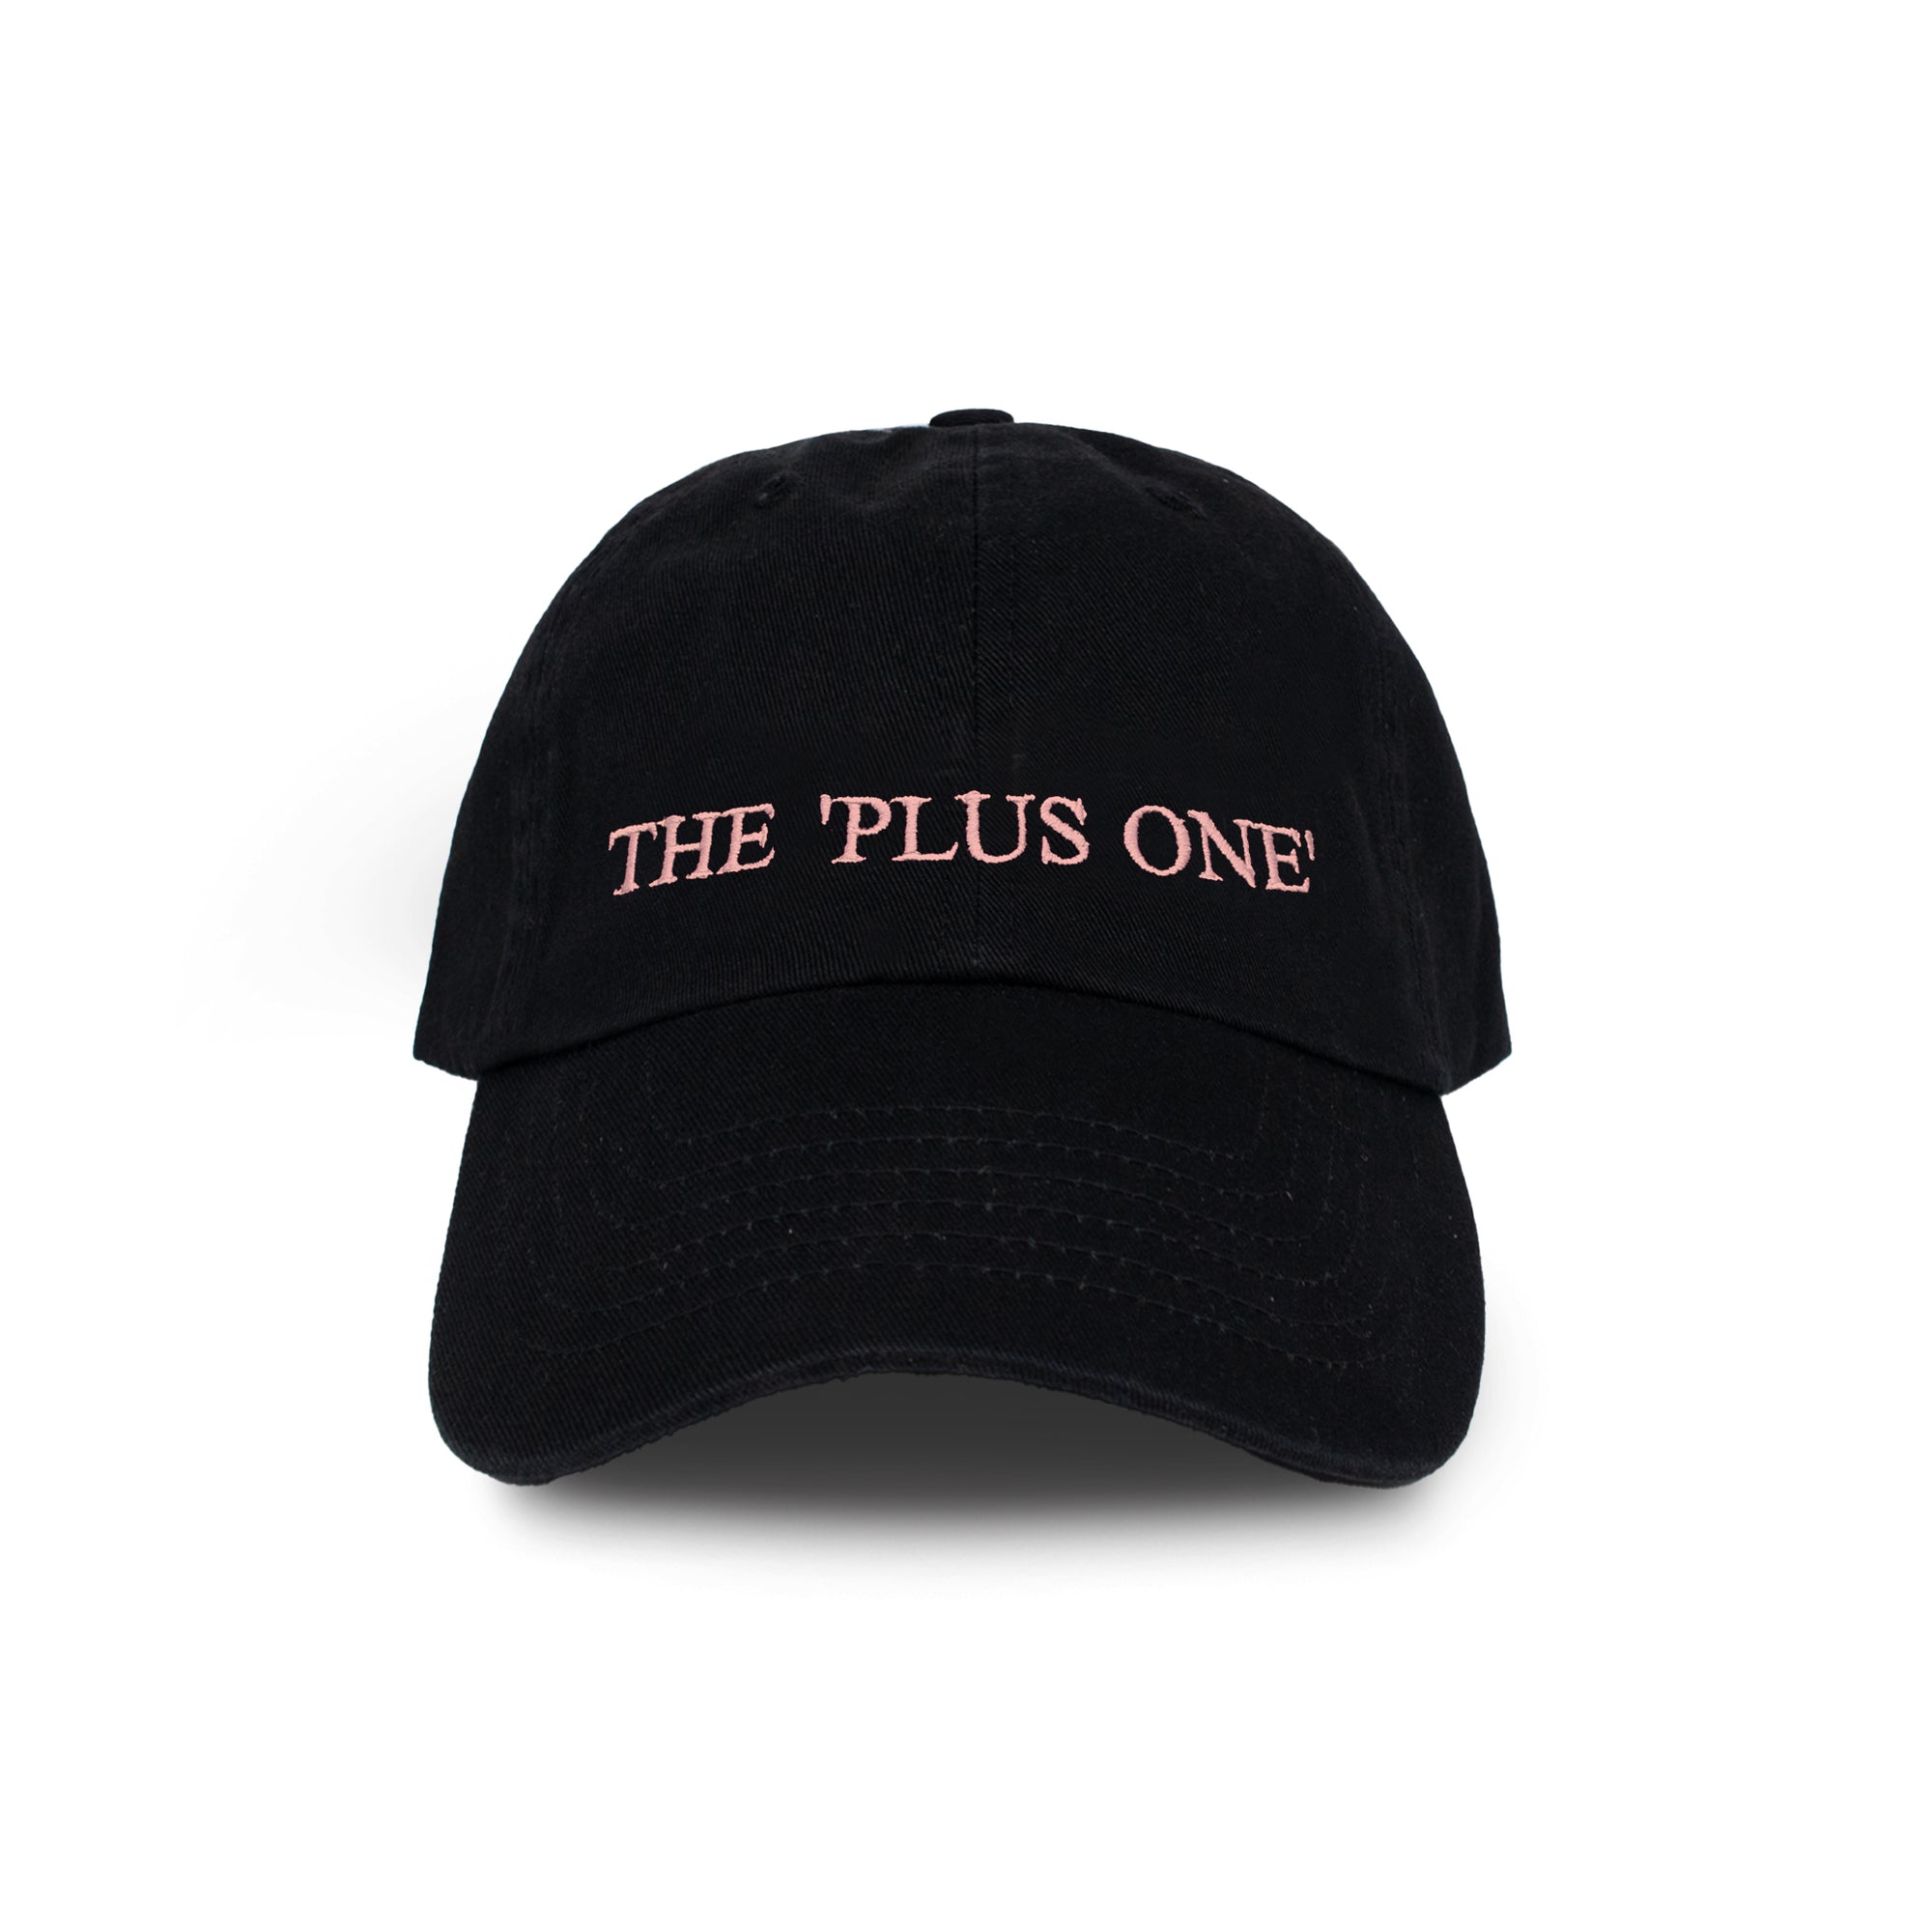 THE 'PLUS ONE'